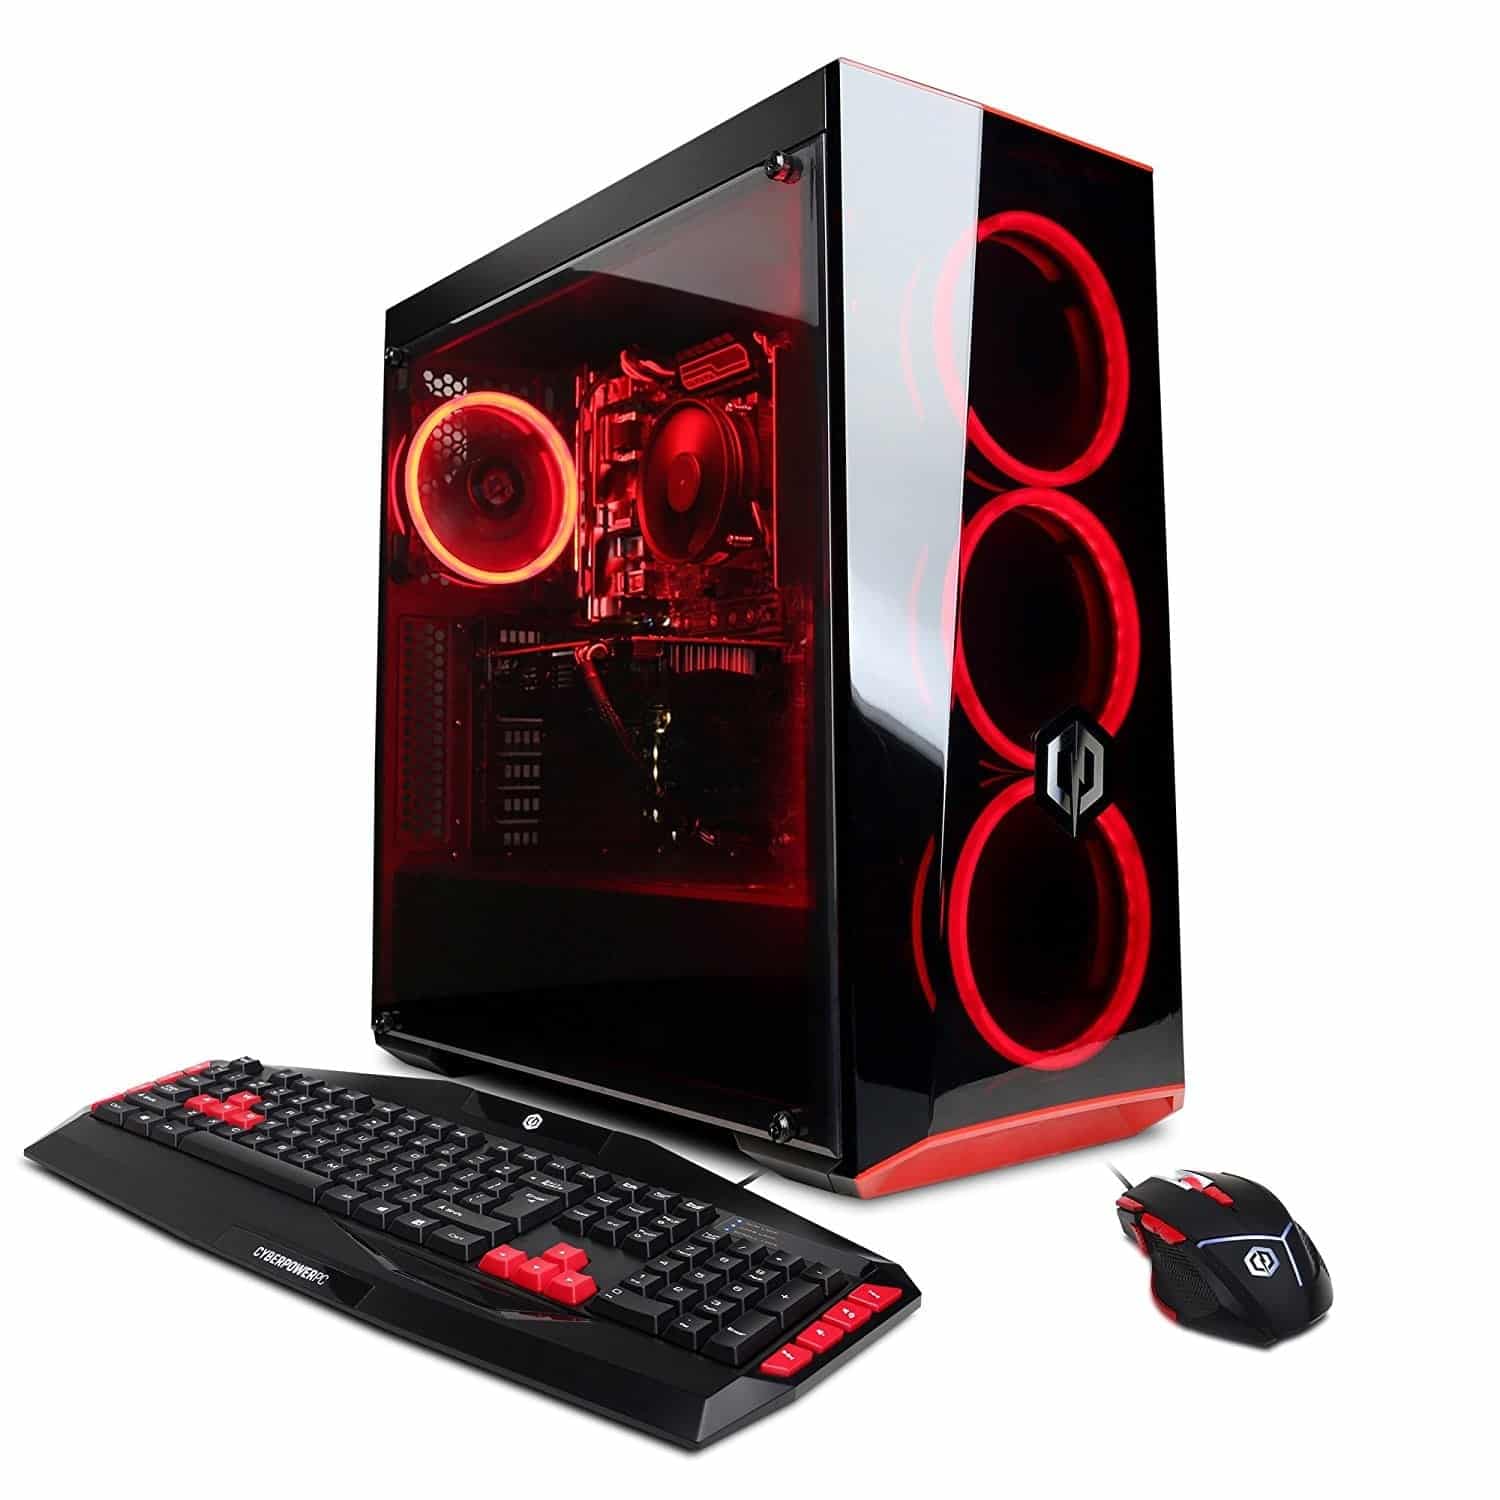 Cyberpower Gamer Xtreme Best Gaming PCs Under 1000 for 2018